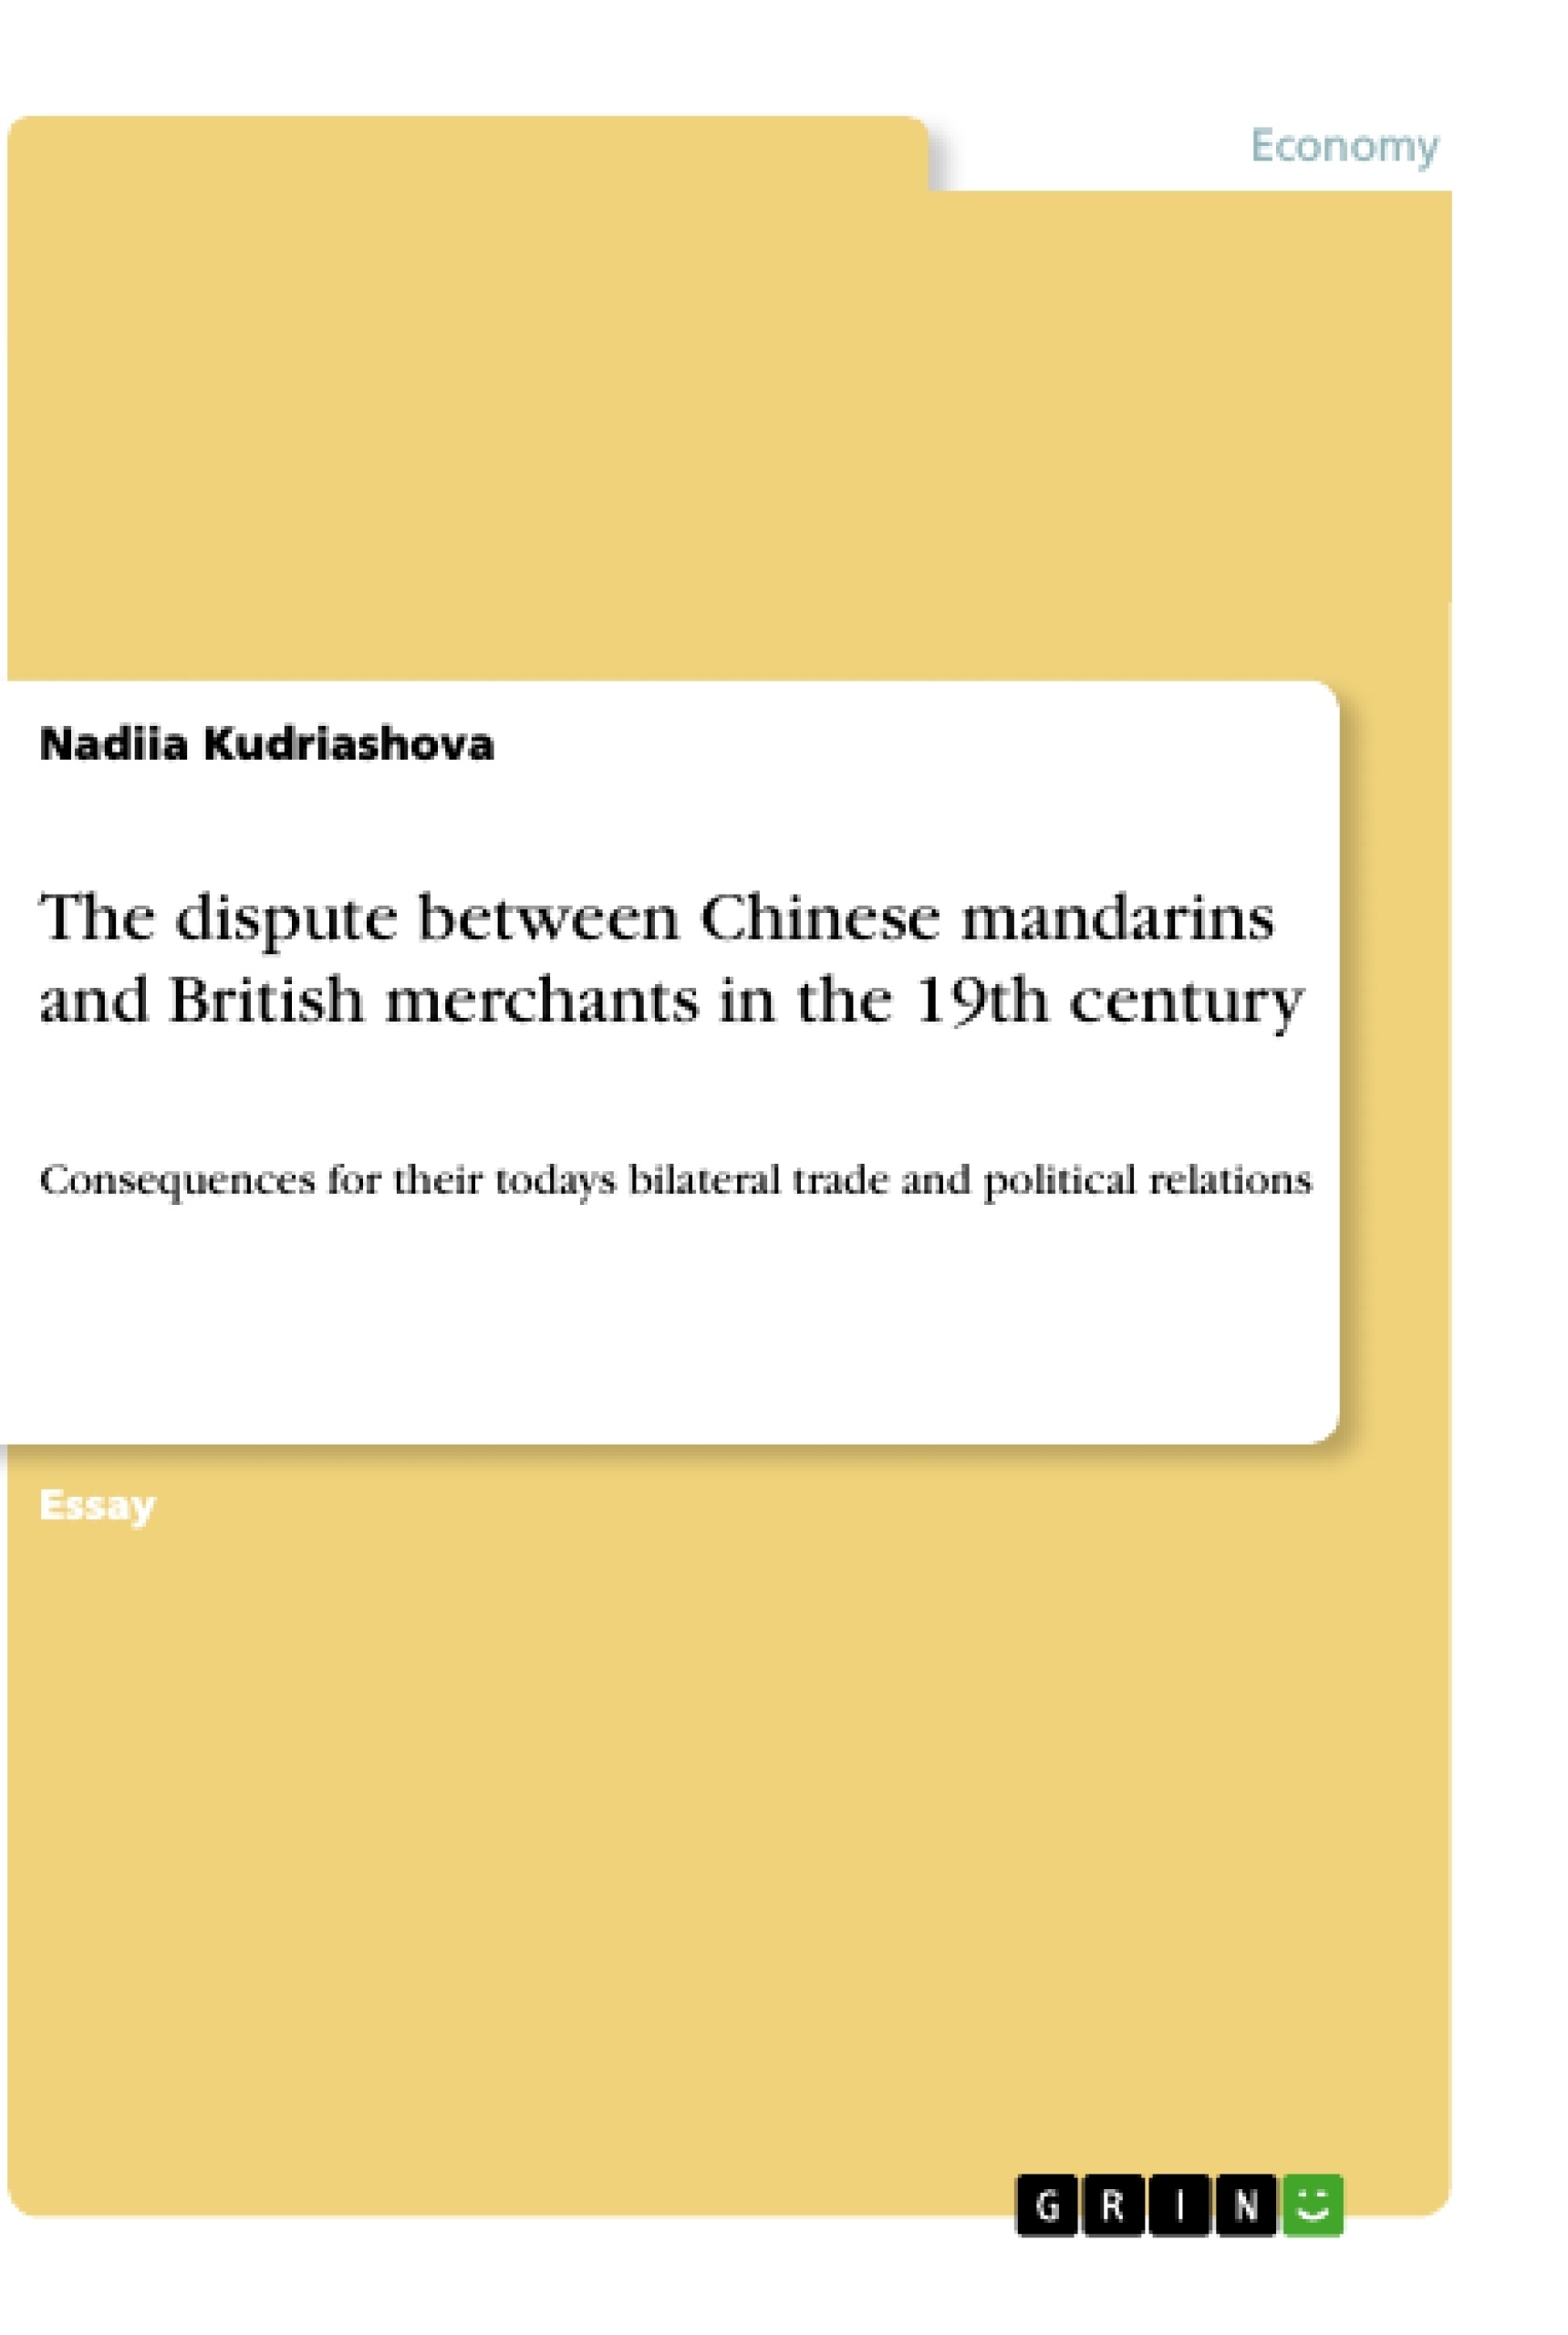 Título: The dispute between Chinese mandarins and British merchants in the 19th century